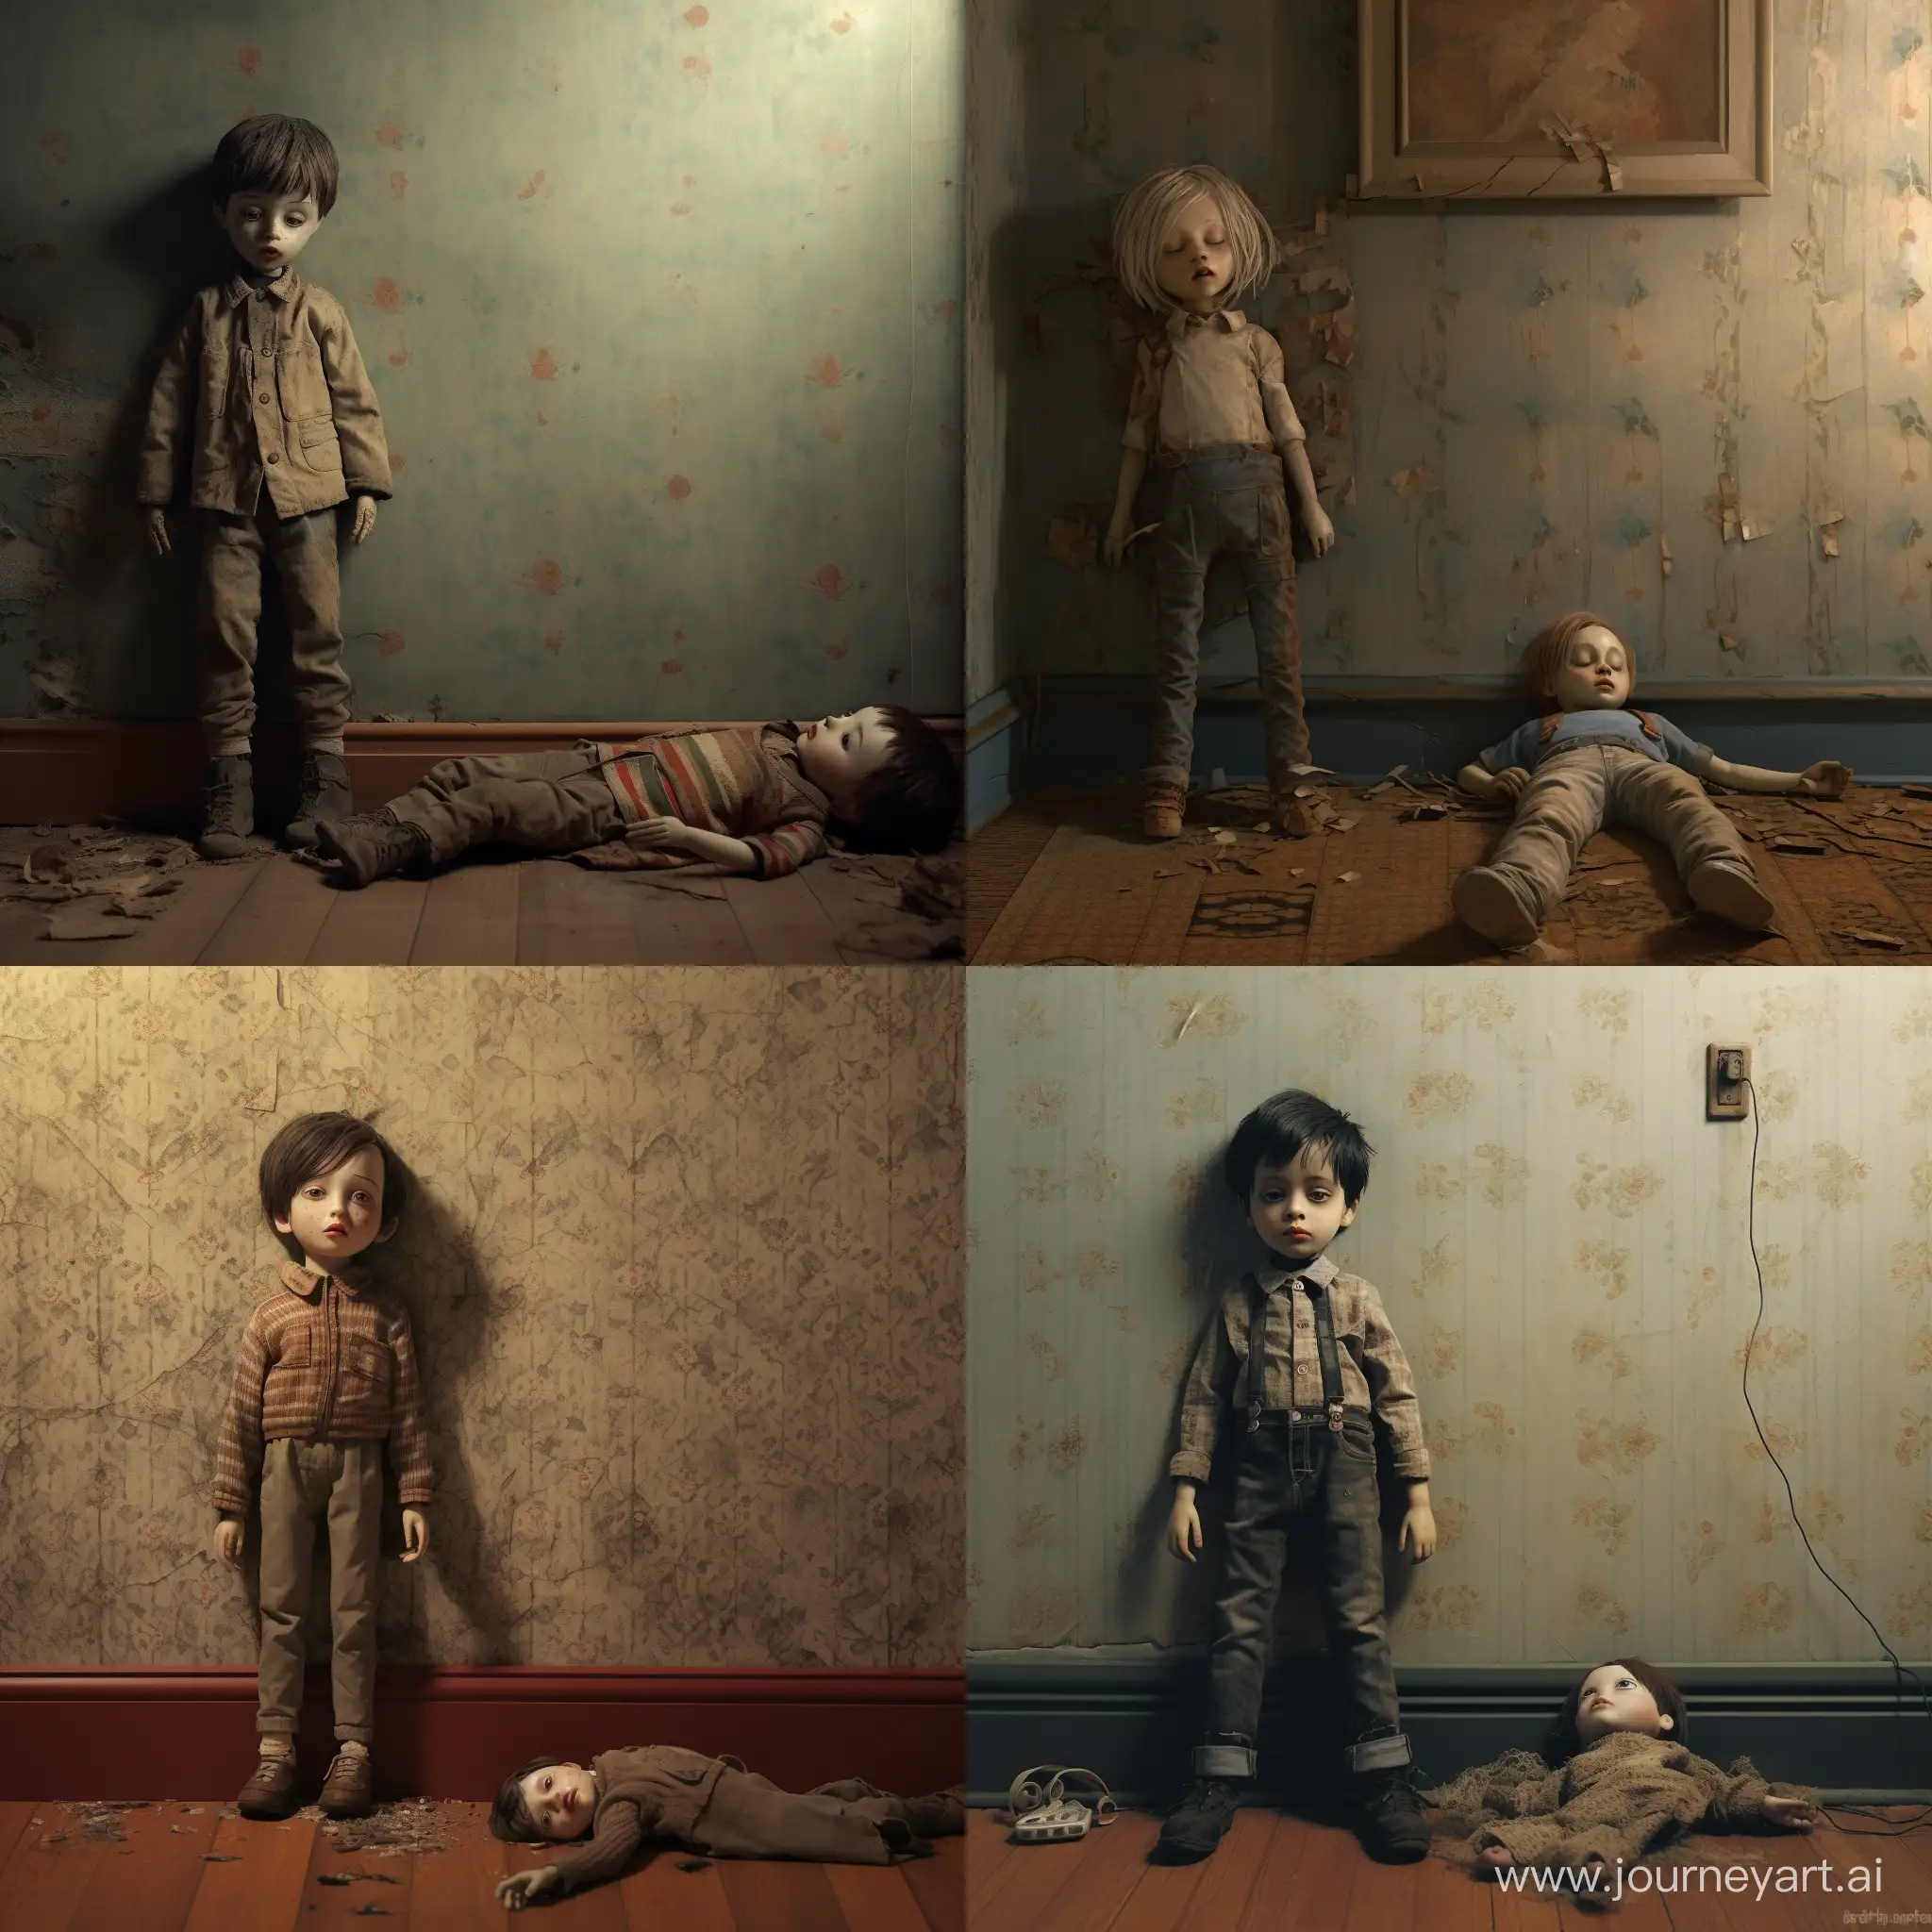 Lonely-Boy-on-Carpet-with-Distressed-Dolls